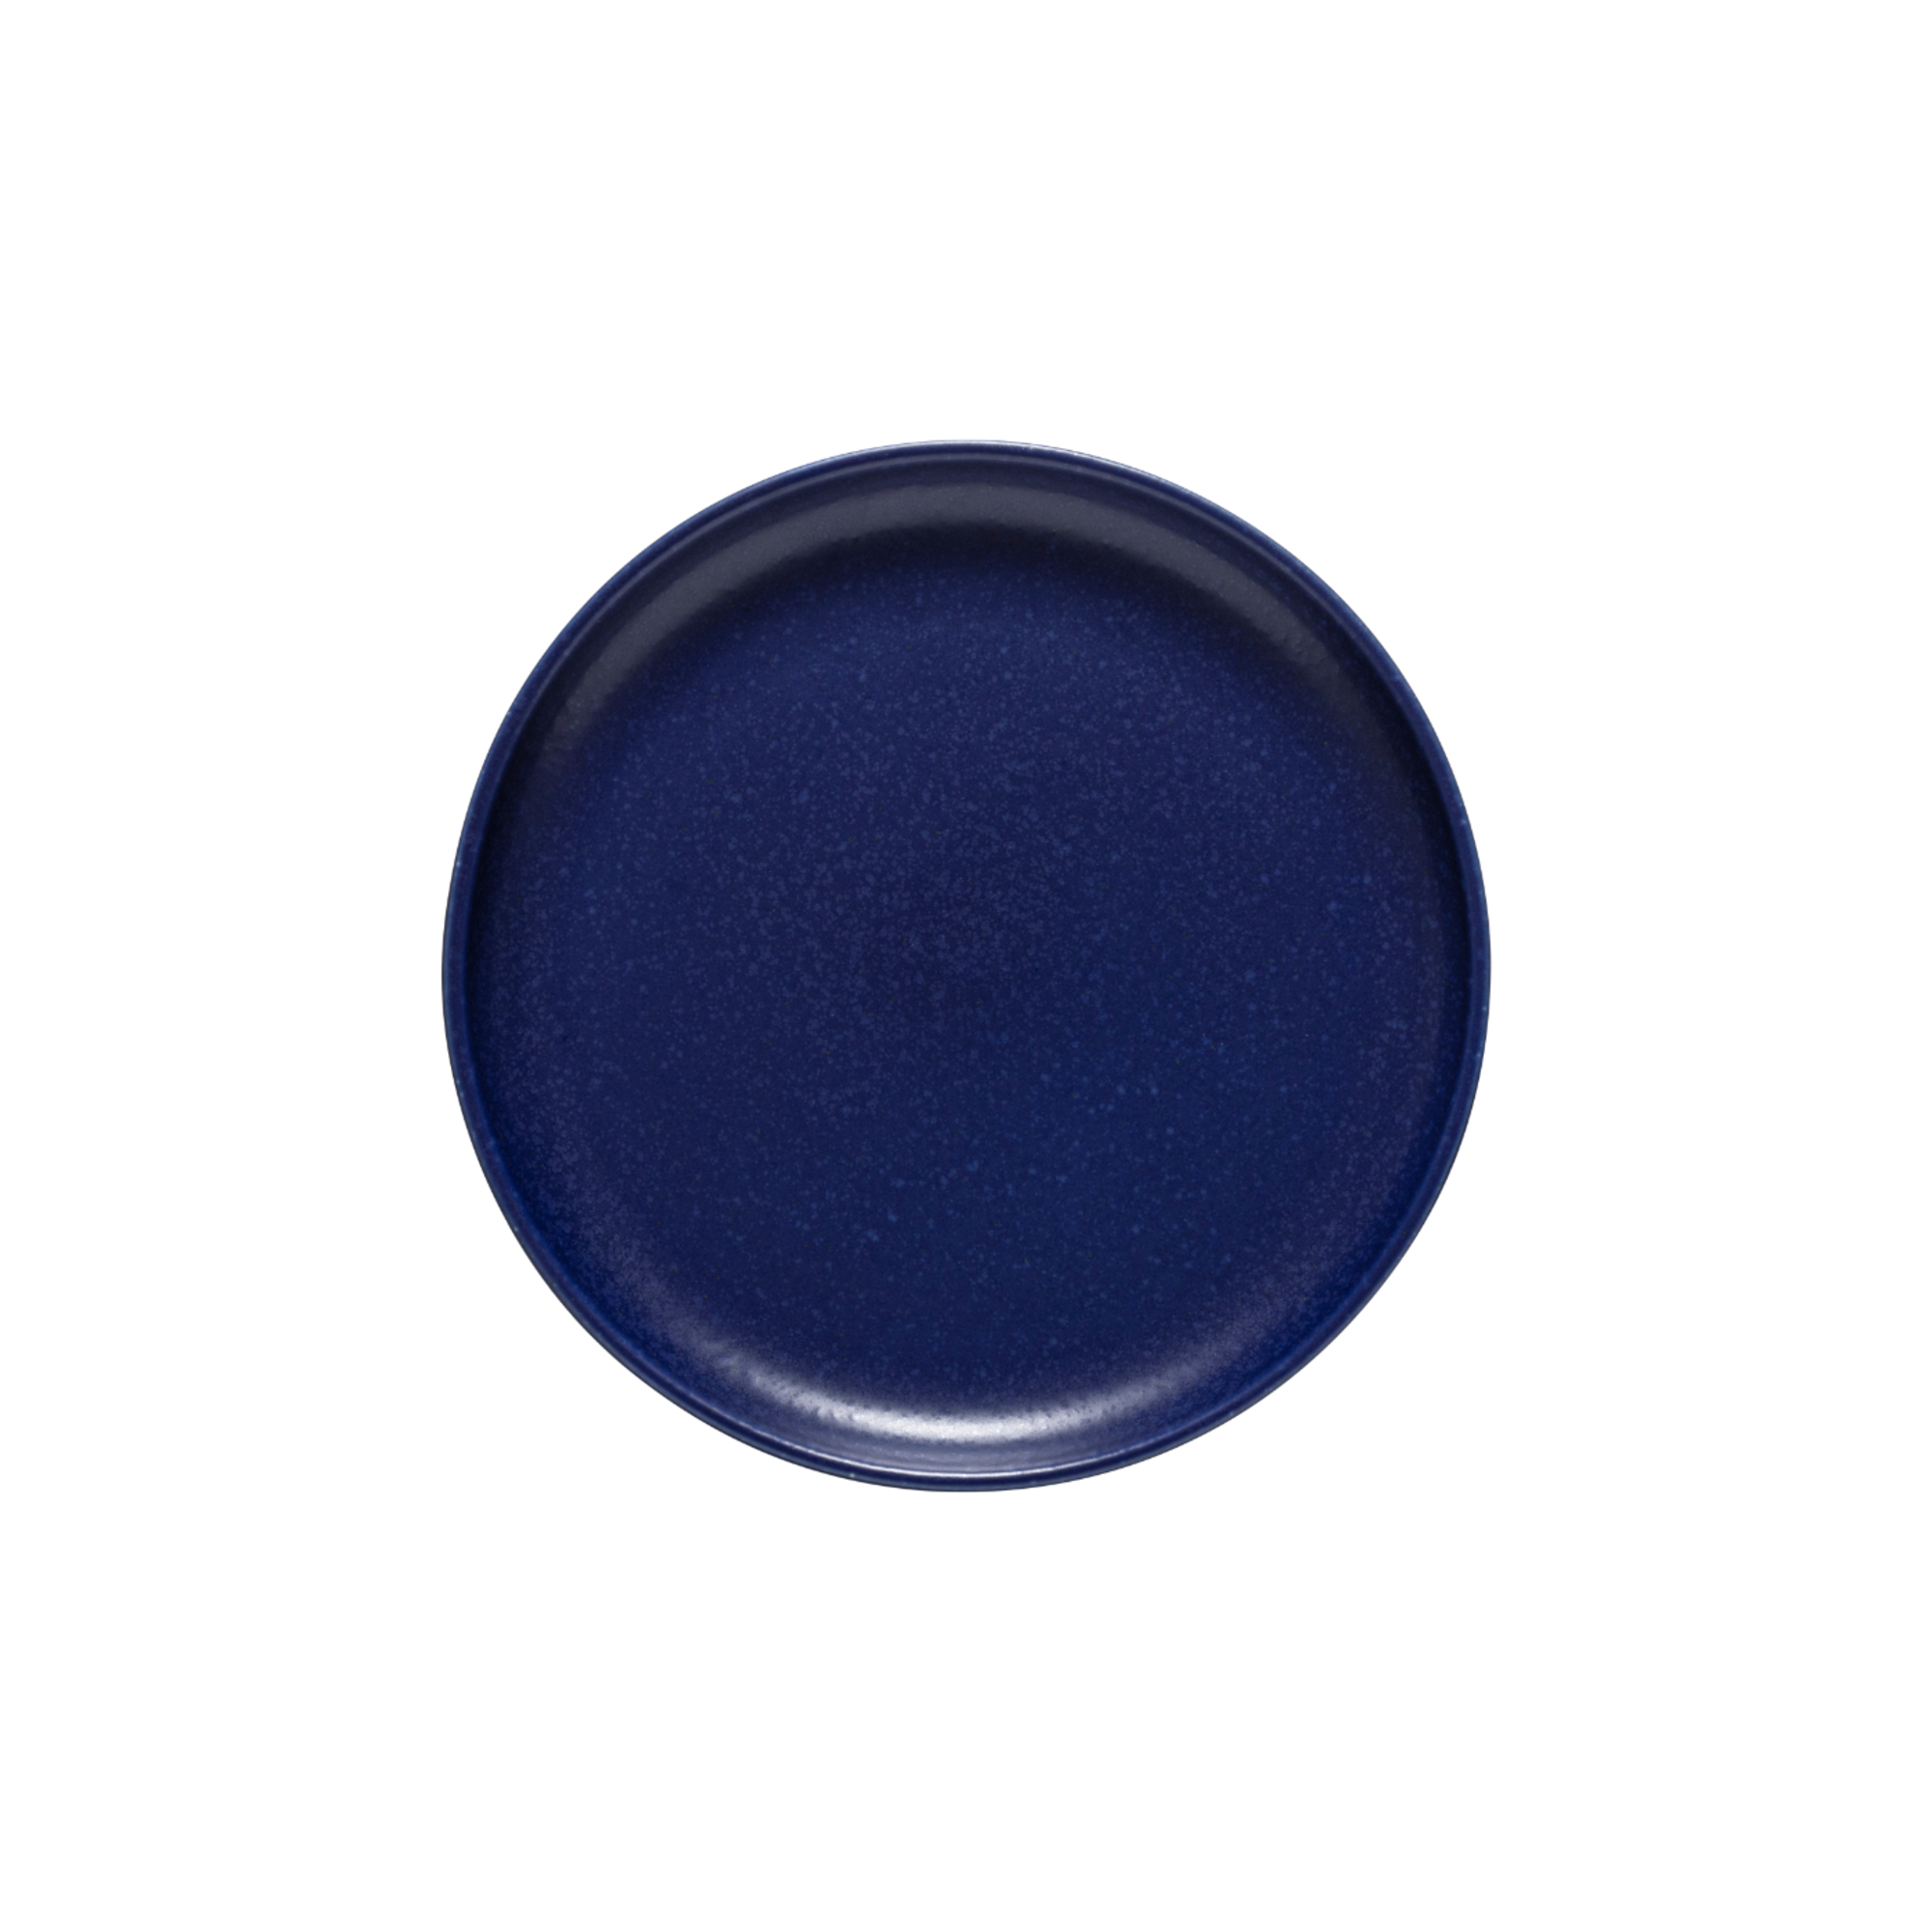 Pacifica Blueberry Salad Plate 22.8cm Gift